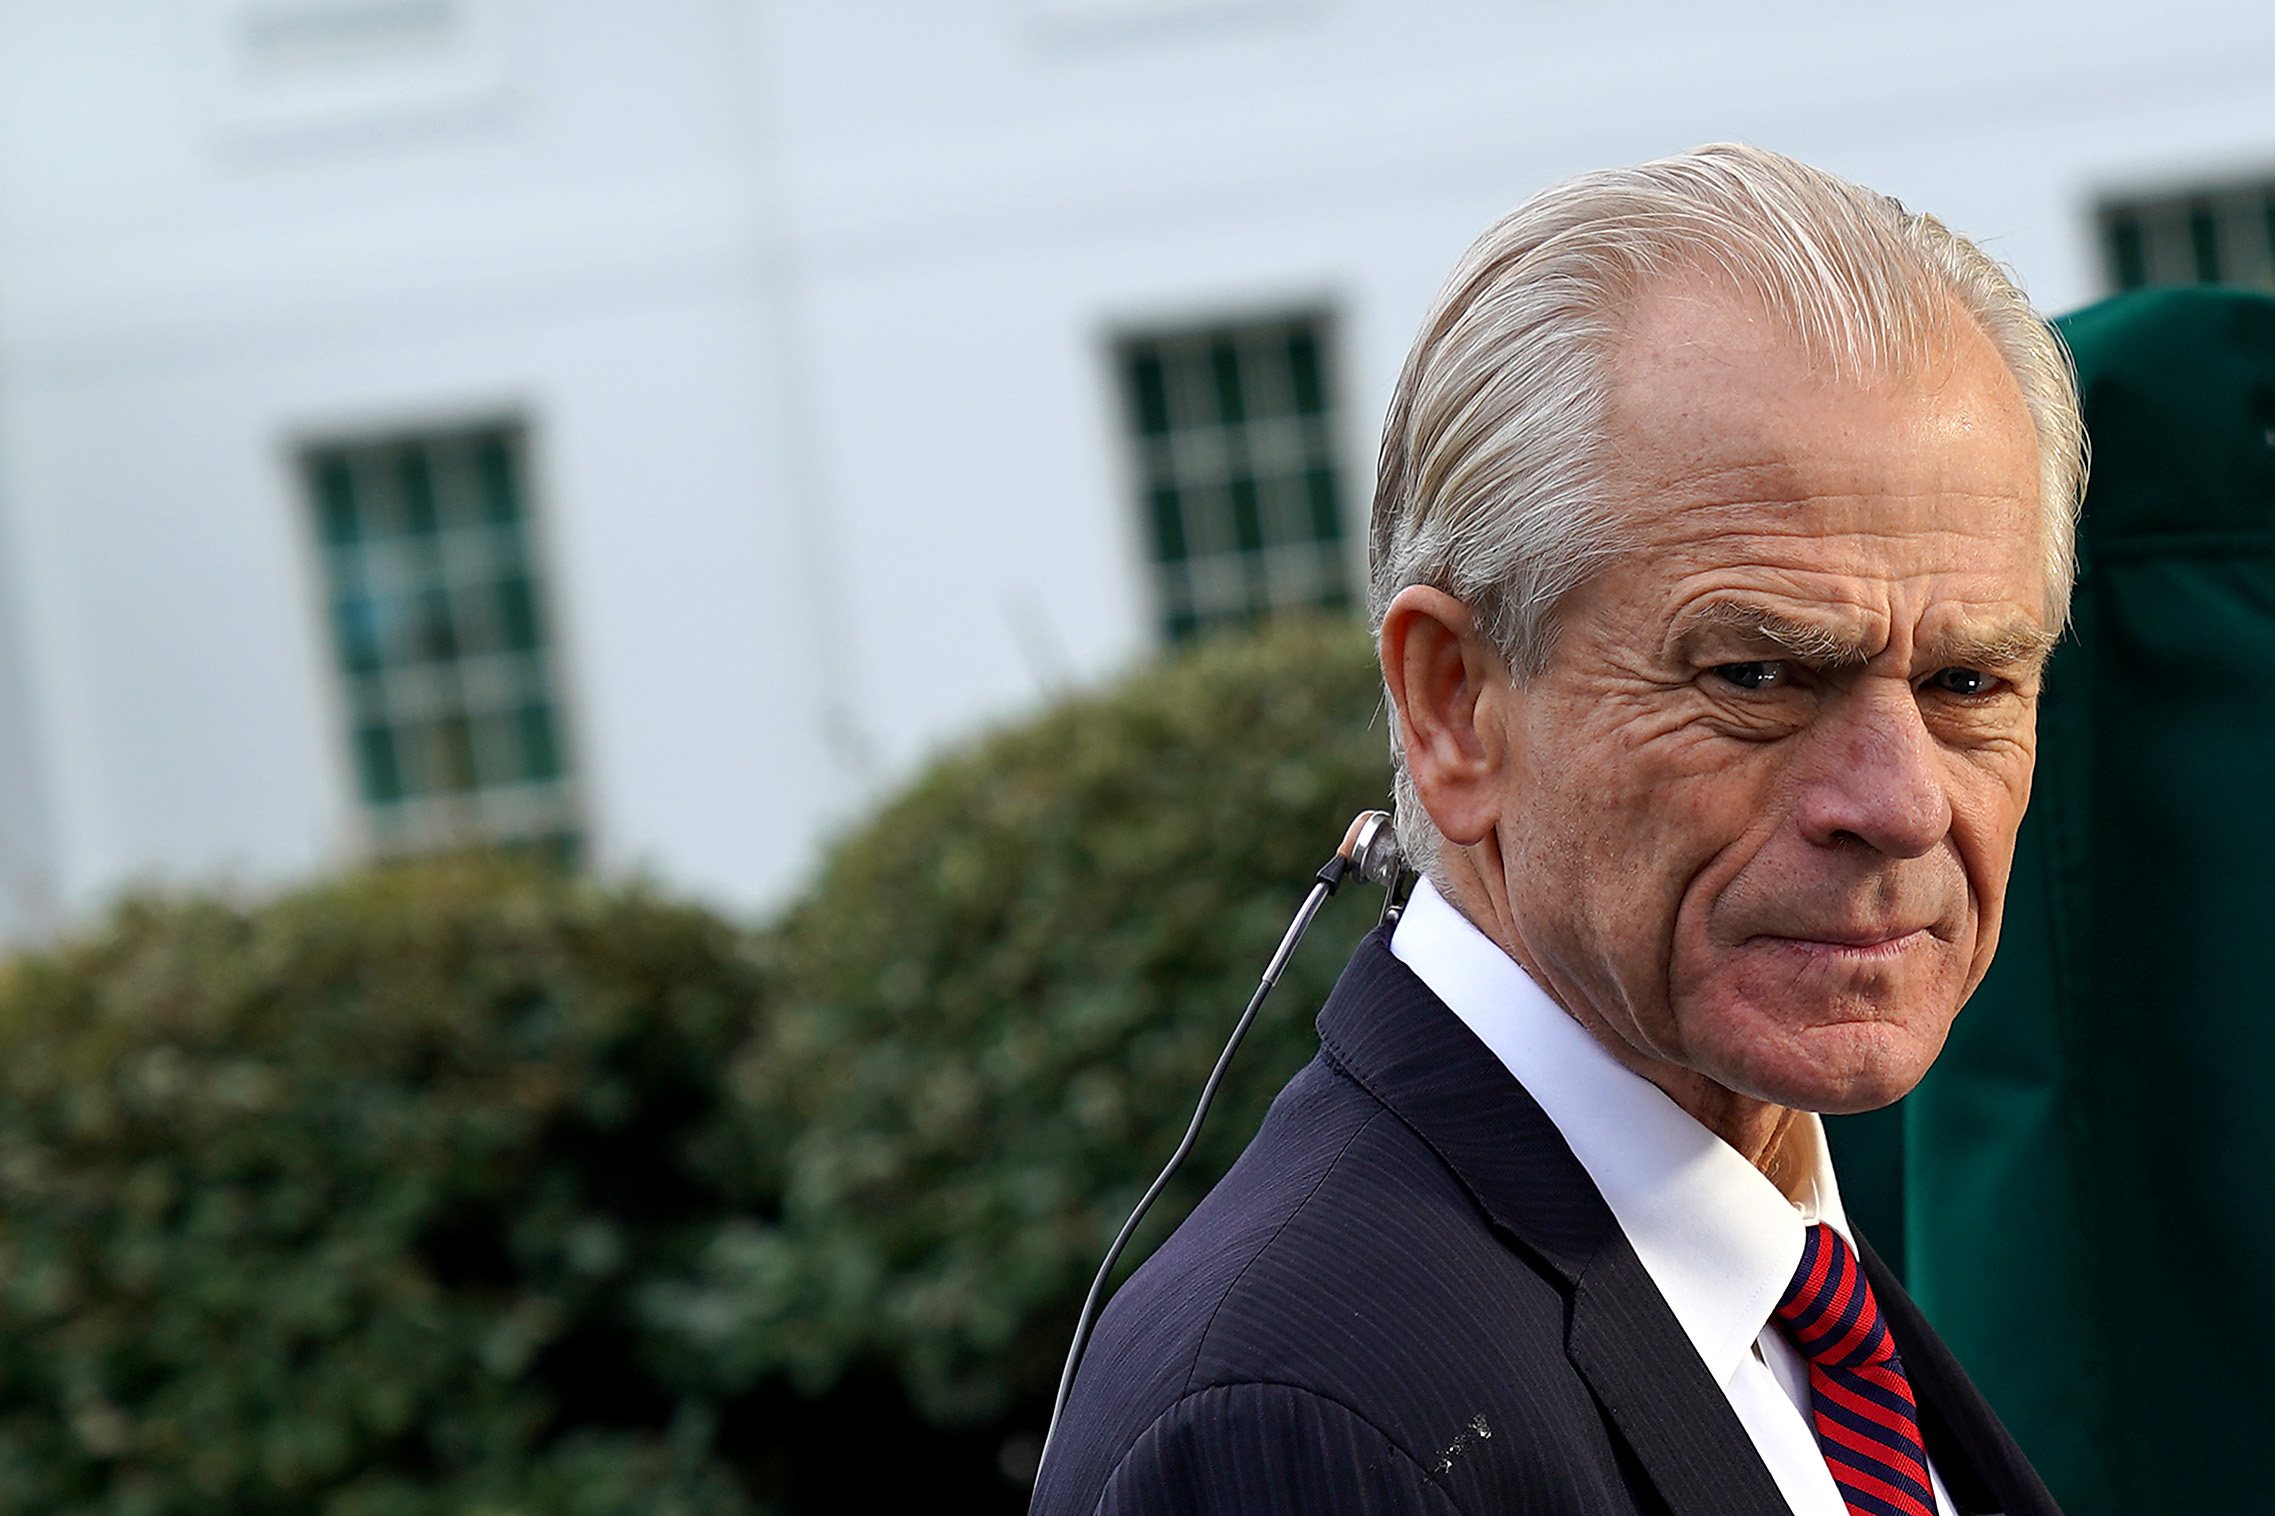 WASHINGTON, DC - OCTOBER 08: White House National Trade Council Director Peter Navarro is interviewed by Fox Business Network outside the White House October 08, 2019 in Washington, DC. Navarro will be taking a lead role in trade negotiations with the Chinese that are scheduled to begin this week. (Photo by Chip Somodevilla/Getty Images)